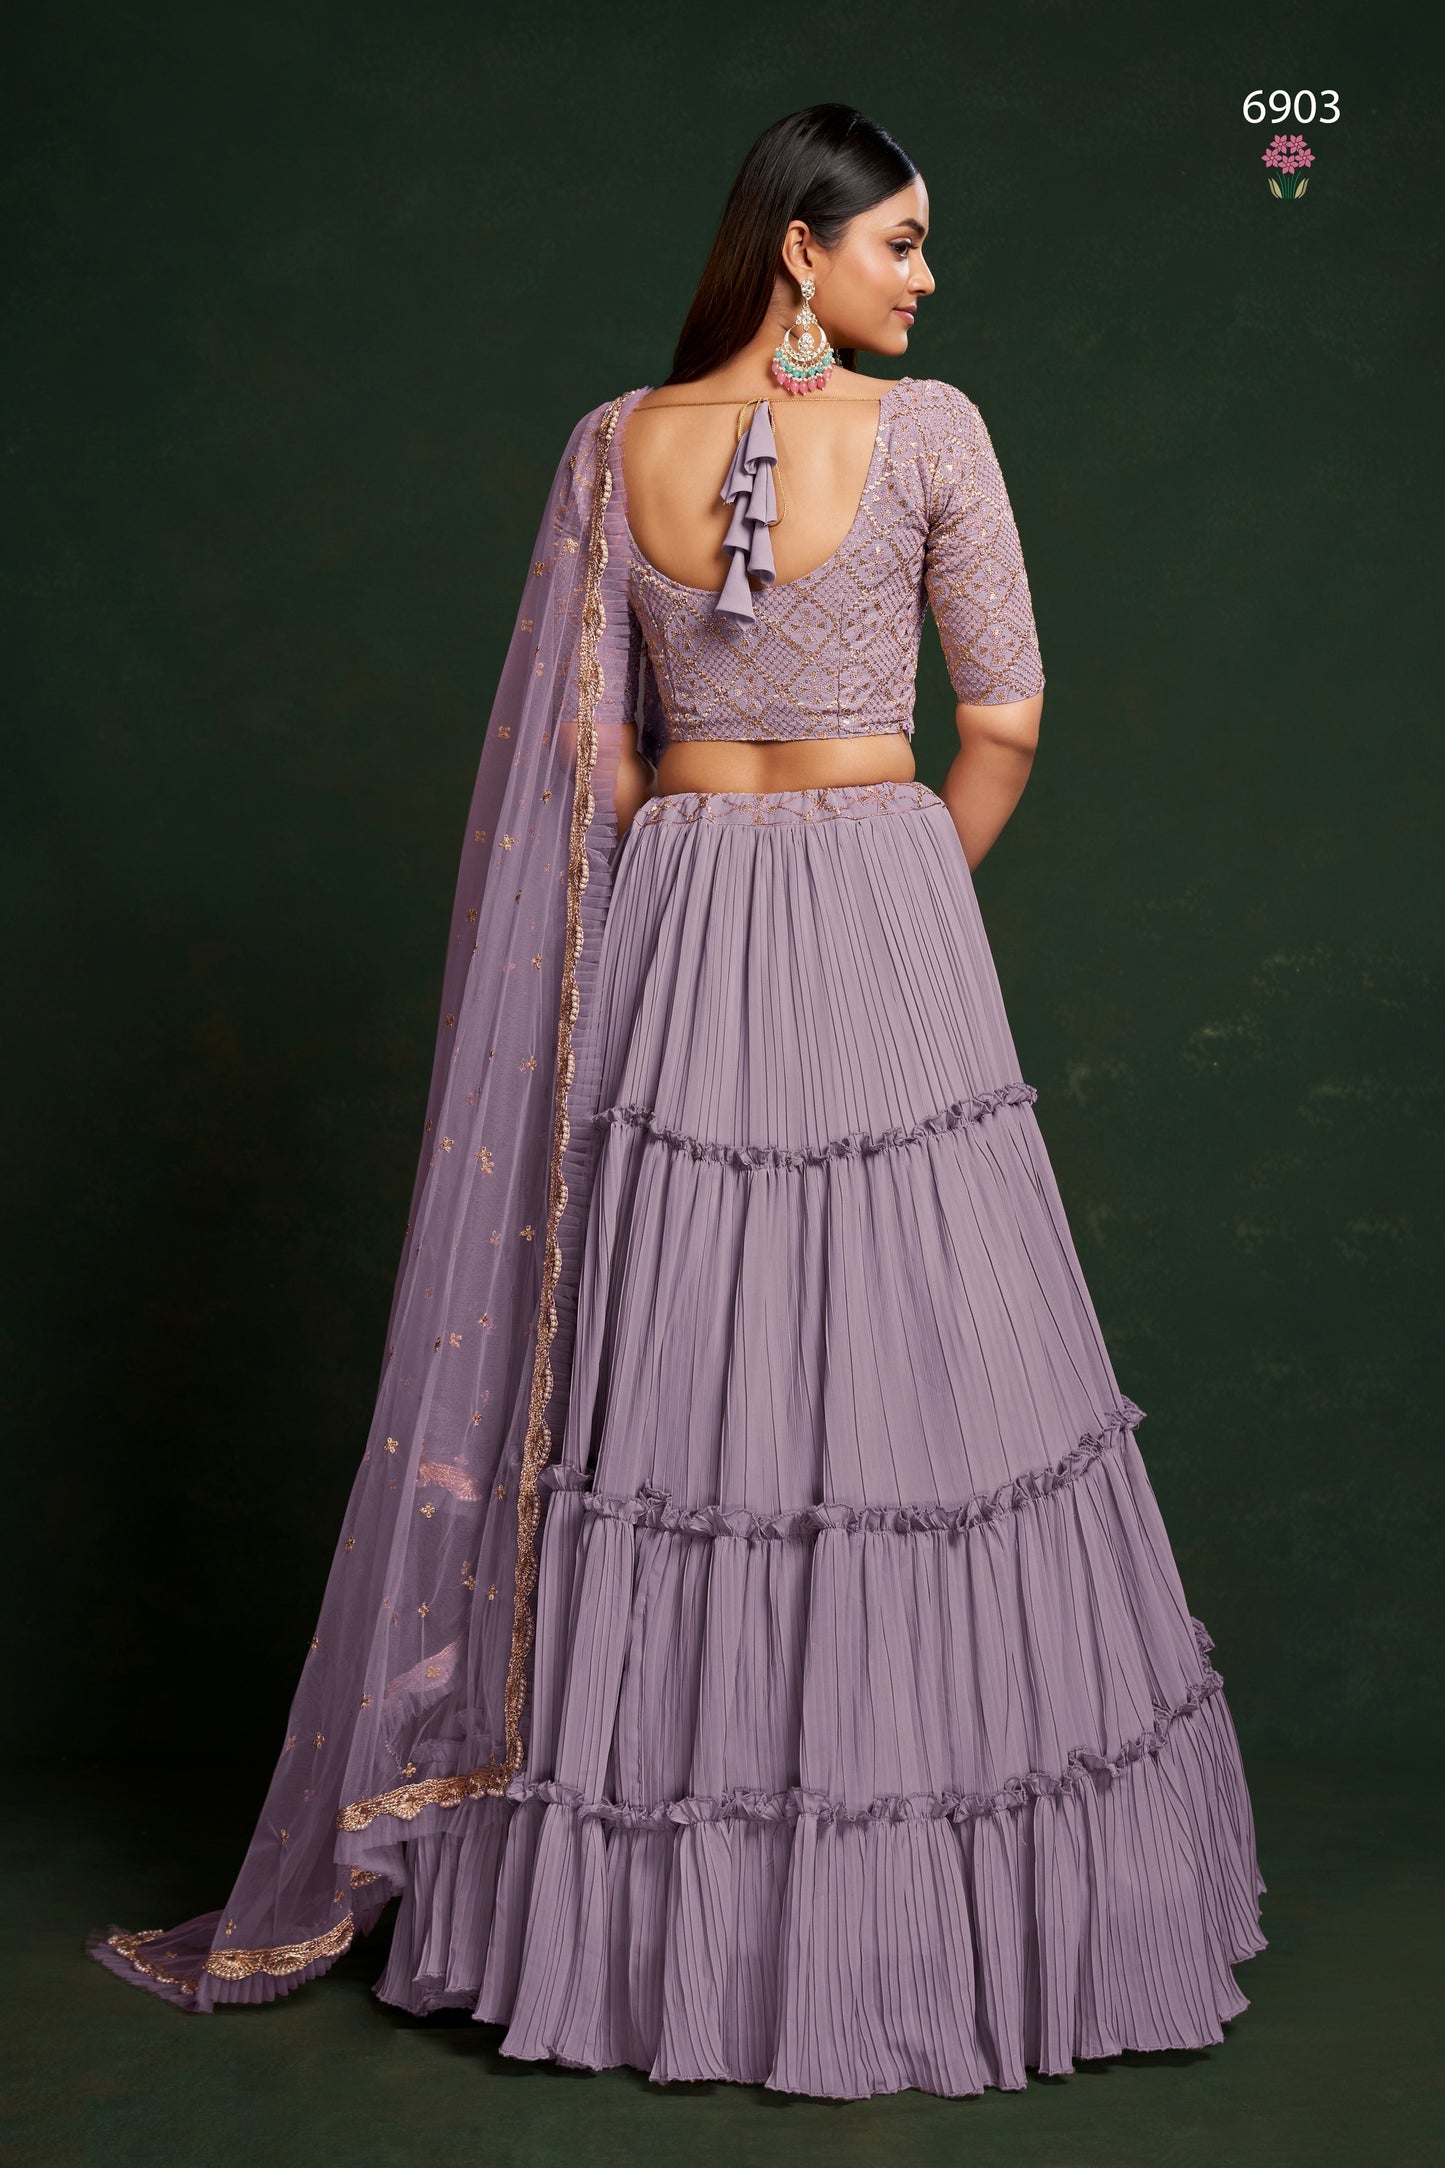 Lavender Georgette Ruffle Lehenga Choli 18 Meter Flair For Indian Festivals & Weddings - Sequence Embroidery Work, Thread Embroidery Work